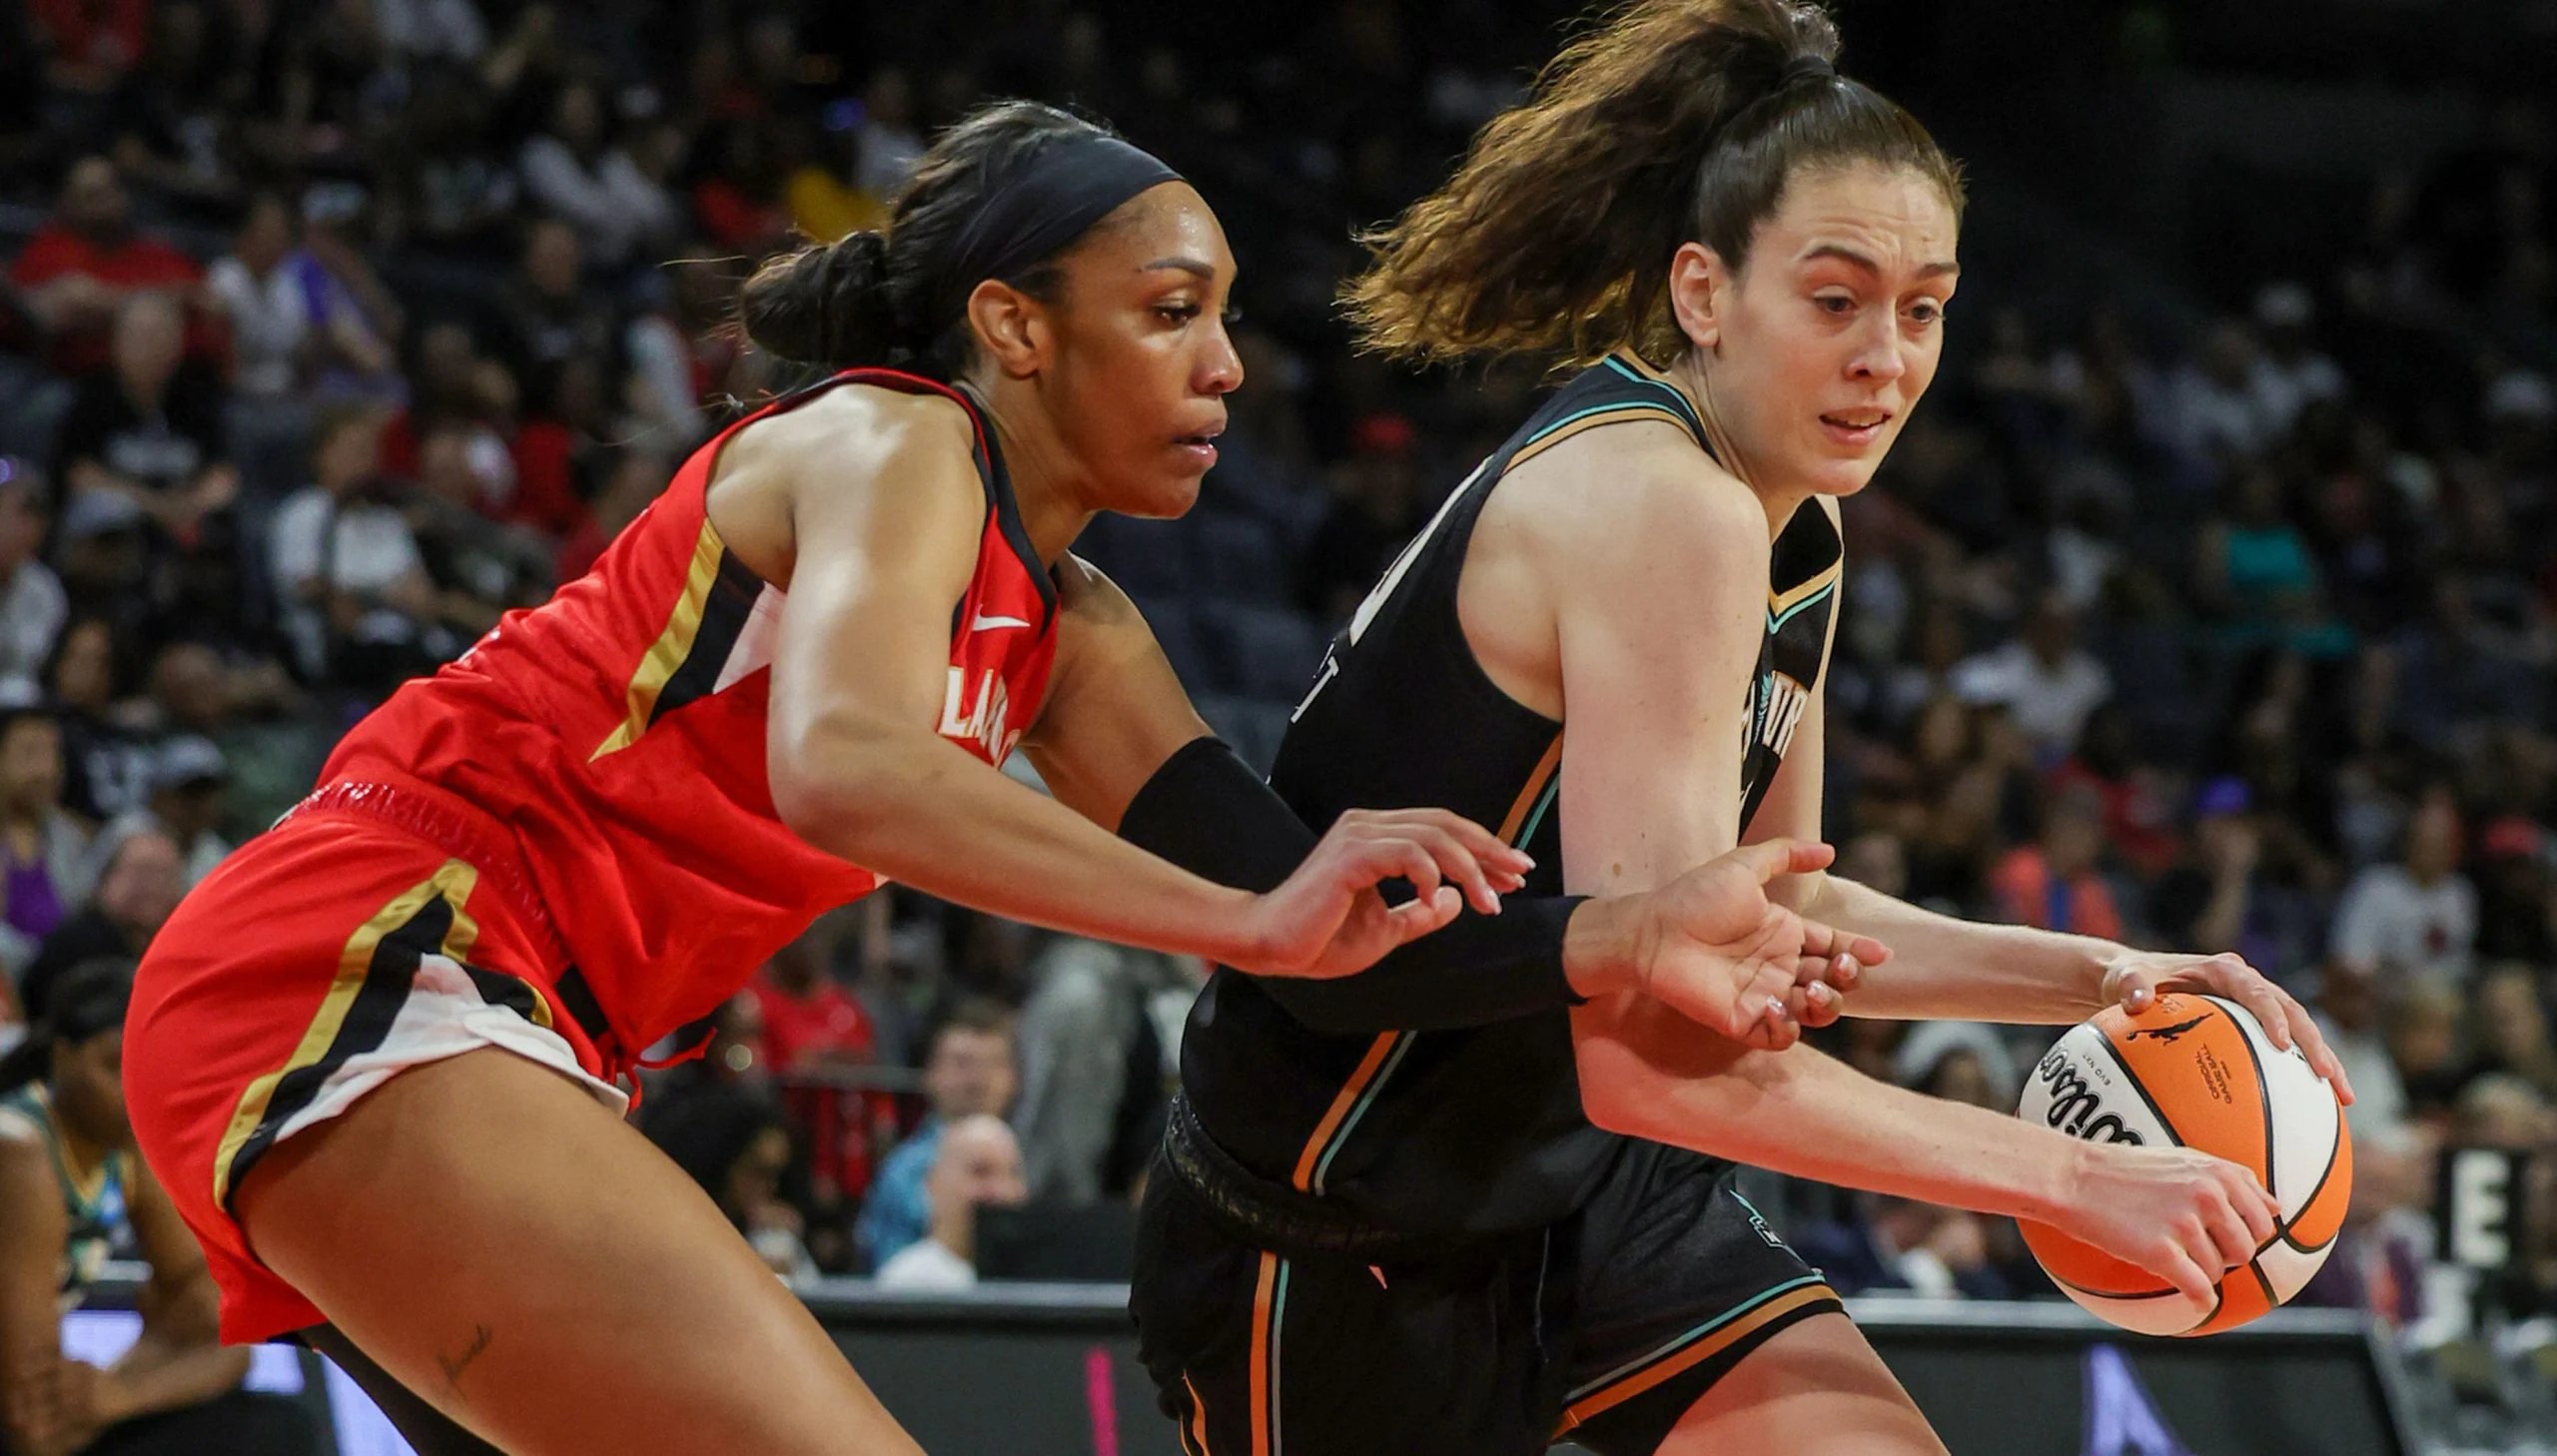 2023 WNBA title odds: Aces, Liberty are overwhelming favorites